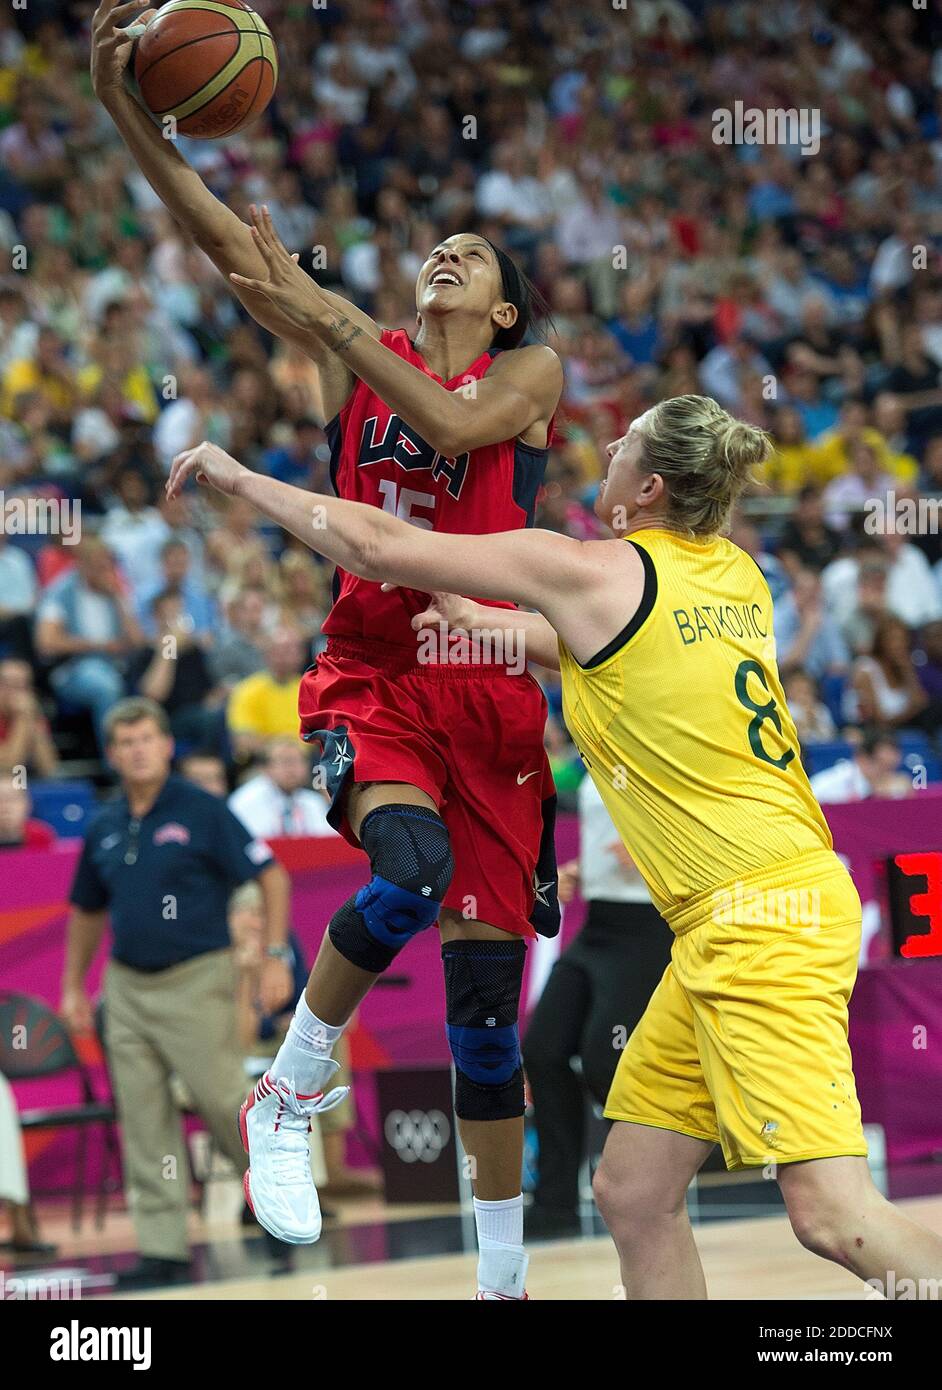 NO FILM, NO VIDEO, NO TV, NO DOCUMENTARY - USA's Candace Parker (15) scores over Australia's Suzy Batkovic (8) during their semifinals game at the Basketball Arena at the North Greenwich Arena during the 2012 Summer Olympic Games in London, UK, Thursday, August 9, 2012. USA defeated Australia 86-73 to advance to the Gold Medal game. Photo by Harry E. Walker/MCT/ABACAPRESS.COM Stock Photo